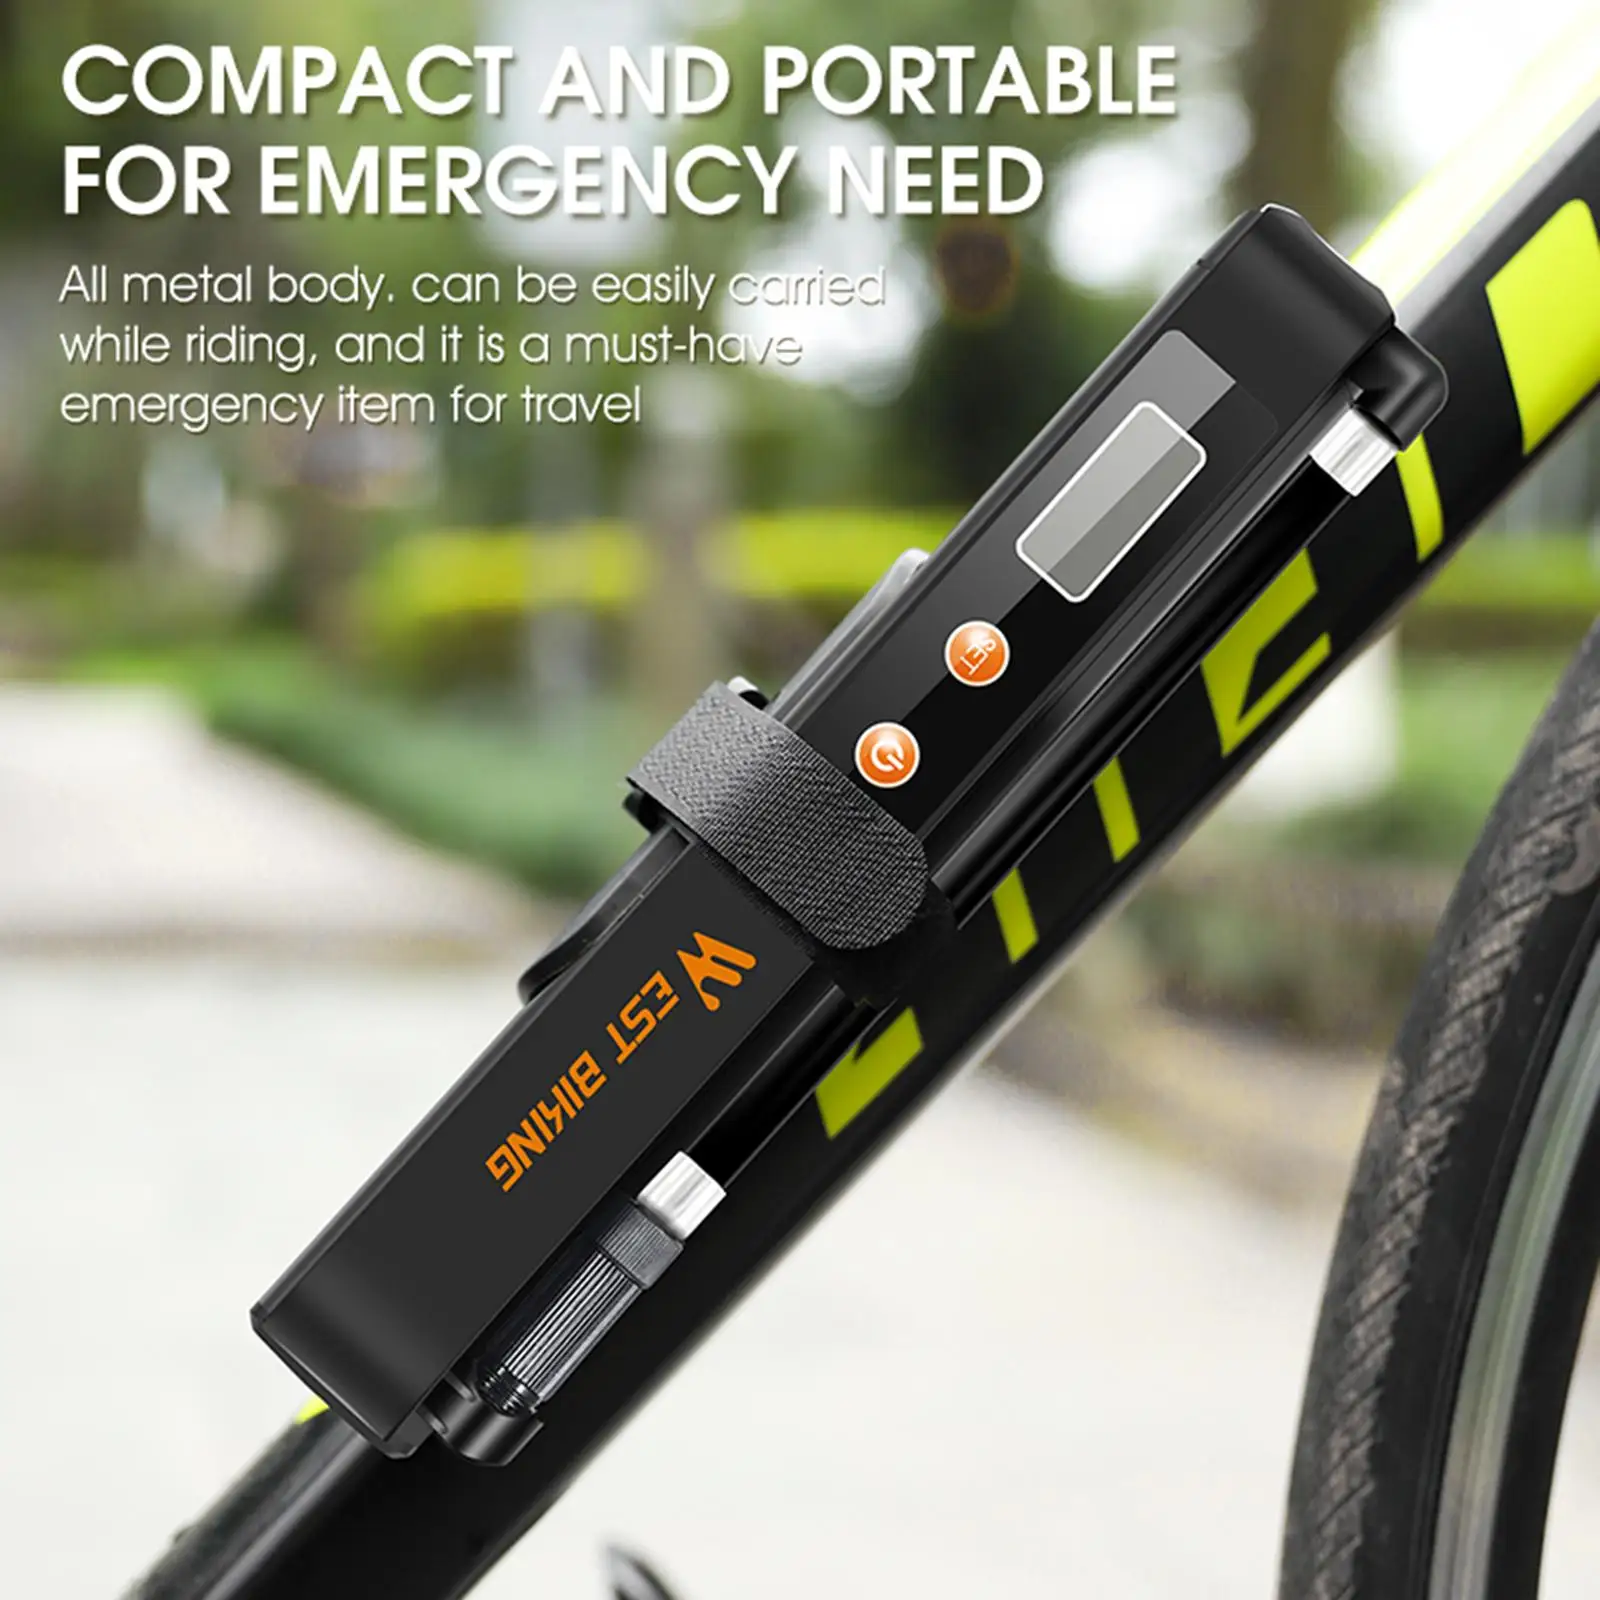 Digital Tyre Inflator Portable 130PSI for Bicycle Vehicle Various Balls Other Inflatables